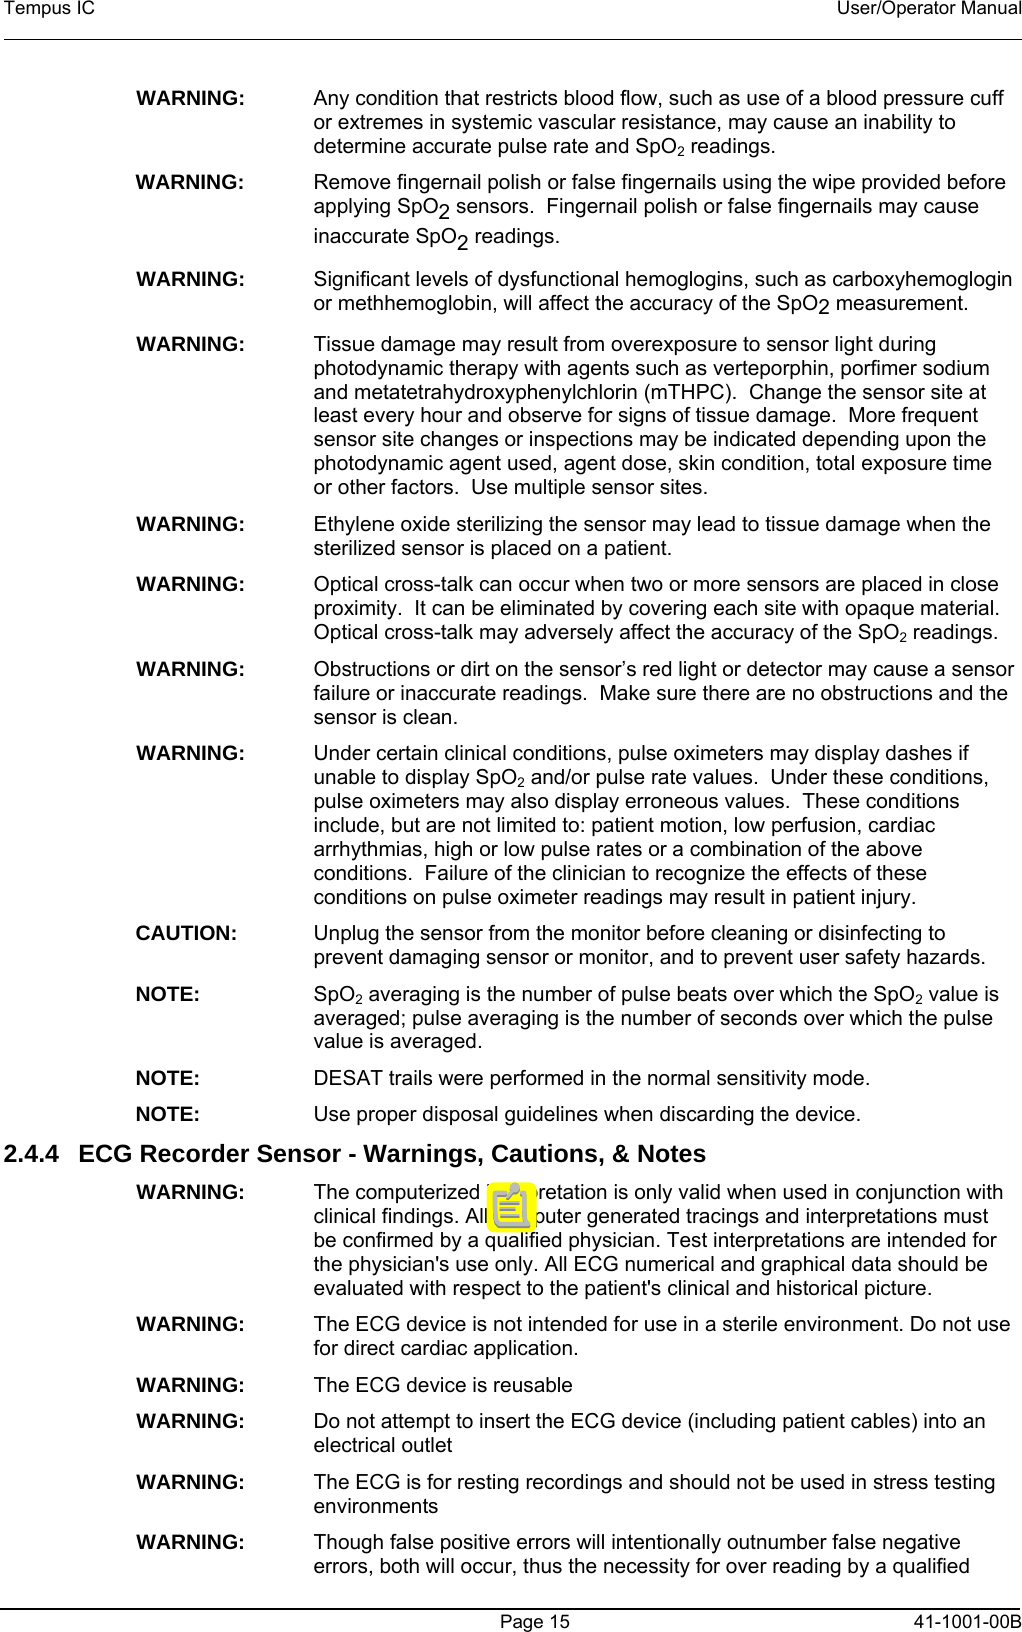 Tempus IC    User/Operator Manual      Page 15   41-1001-00B WARNING:    Any condition that restricts blood flow, such as use of a blood pressure cuff or extremes in systemic vascular resistance, may cause an inability to determine accurate pulse rate and SpO2 readings. WARNING:    Remove fingernail polish or false fingernails using the wipe provided before applying SpO2 sensors.  Fingernail polish or false fingernails may cause inaccurate SpO2 readings.   WARNING:    Significant levels of dysfunctional hemoglogins, such as carboxyhemoglogin or methhemoglobin, will affect the accuracy of the SpO2 measurement. WARNING:    Tissue damage may result from overexposure to sensor light during photodynamic therapy with agents such as verteporphin, porfimer sodium and metatetrahydroxyphenylchlorin (mTHPC).  Change the sensor site at least every hour and observe for signs of tissue damage.  More frequent sensor site changes or inspections may be indicated depending upon the photodynamic agent used, agent dose, skin condition, total exposure time or other factors.  Use multiple sensor sites. WARNING:    Ethylene oxide sterilizing the sensor may lead to tissue damage when the sterilized sensor is placed on a patient. WARNING:    Optical cross-talk can occur when two or more sensors are placed in close proximity.  It can be eliminated by covering each site with opaque material.  Optical cross-talk may adversely affect the accuracy of the SpO2 readings. WARNING:    Obstructions or dirt on the sensor’s red light or detector may cause a sensor failure or inaccurate readings.  Make sure there are no obstructions and the sensor is clean.  WARNING:    Under certain clinical conditions, pulse oximeters may display dashes if unable to display SpO2 and/or pulse rate values.  Under these conditions, pulse oximeters may also display erroneous values.  These conditions include, but are not limited to: patient motion, low perfusion, cardiac arrhythmias, high or low pulse rates or a combination of the above conditions.  Failure of the clinician to recognize the effects of these conditions on pulse oximeter readings may result in patient injury. CAUTION:    Unplug the sensor from the monitor before cleaning or disinfecting to prevent damaging sensor or monitor, and to prevent user safety hazards. NOTE:    SpO2 averaging is the number of pulse beats over which the SpO2 value is averaged; pulse averaging is the number of seconds over which the pulse value is averaged. NOTE:    DESAT trails were performed in the normal sensitivity mode. NOTE:    Use proper disposal guidelines when discarding the device. 2.4.4  ECG Recorder Sensor - Warnings, Cautions, &amp; Notes WARNING:   The computerized interpretation is only valid when used in conjunction with clinical findings. All computer generated tracings and interpretations must be confirmed by a qualified physician. Test interpretations are intended for the physician&apos;s use only. All ECG numerical and graphical data should be evaluated with respect to the patient&apos;s clinical and historical picture.  WARNING:   The ECG device is not intended for use in a sterile environment. Do not use for direct cardiac application.  WARNING:   The ECG device is reusable  WARNING:   Do not attempt to insert the ECG device (including patient cables) into an electrical outlet  WARNING:   The ECG is for resting recordings and should not be used in stress testing environments  WARNING:   Though false positive errors will intentionally outnumber false negative errors, both will occur, thus the necessity for over reading by a qualified 